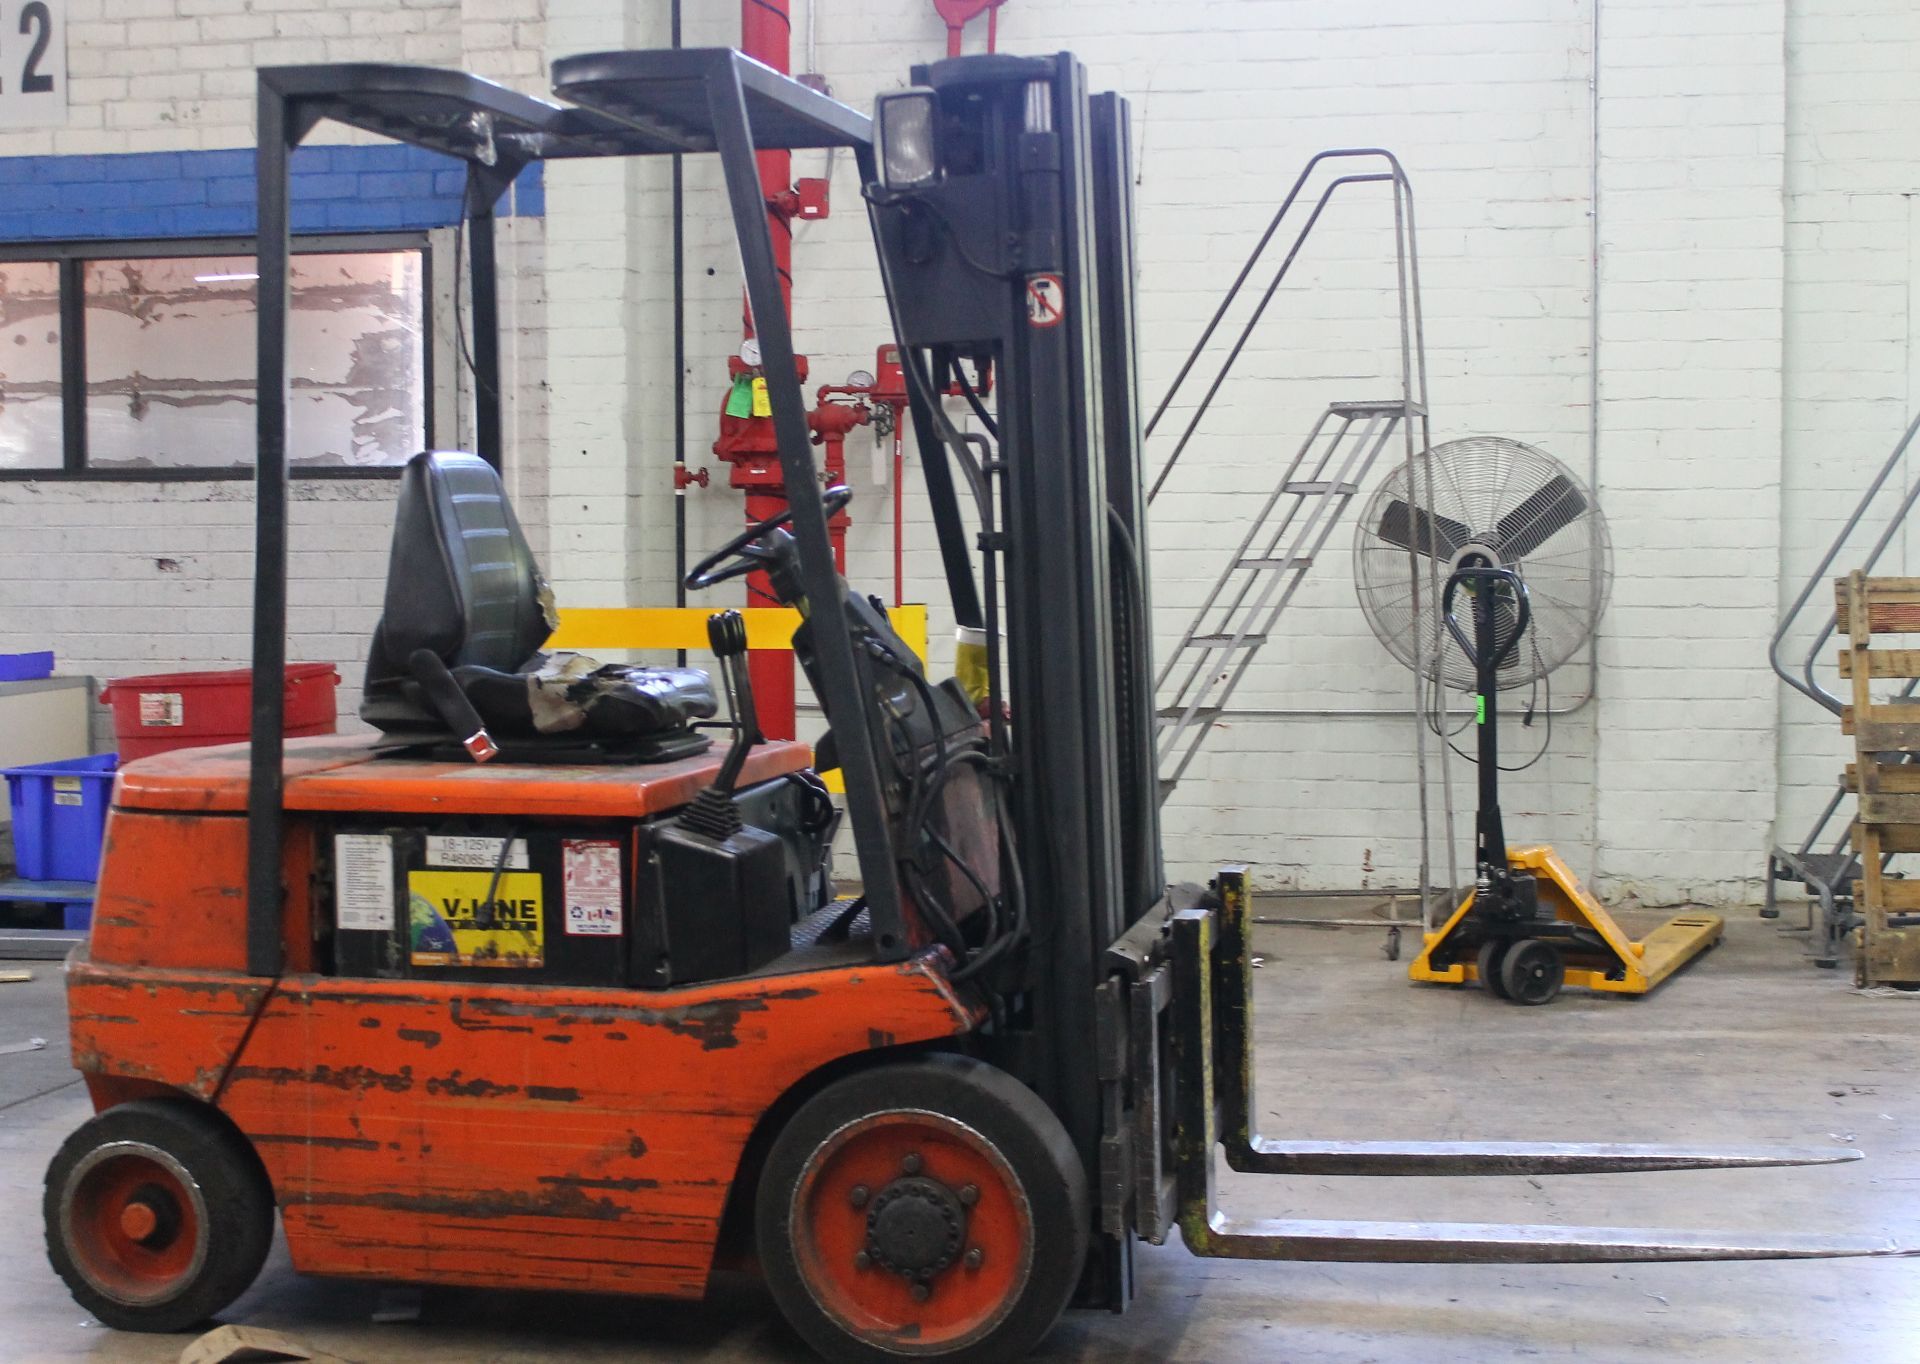 BAKER 4000 LBS CAPACITY ELECTRIC FORKLIFT